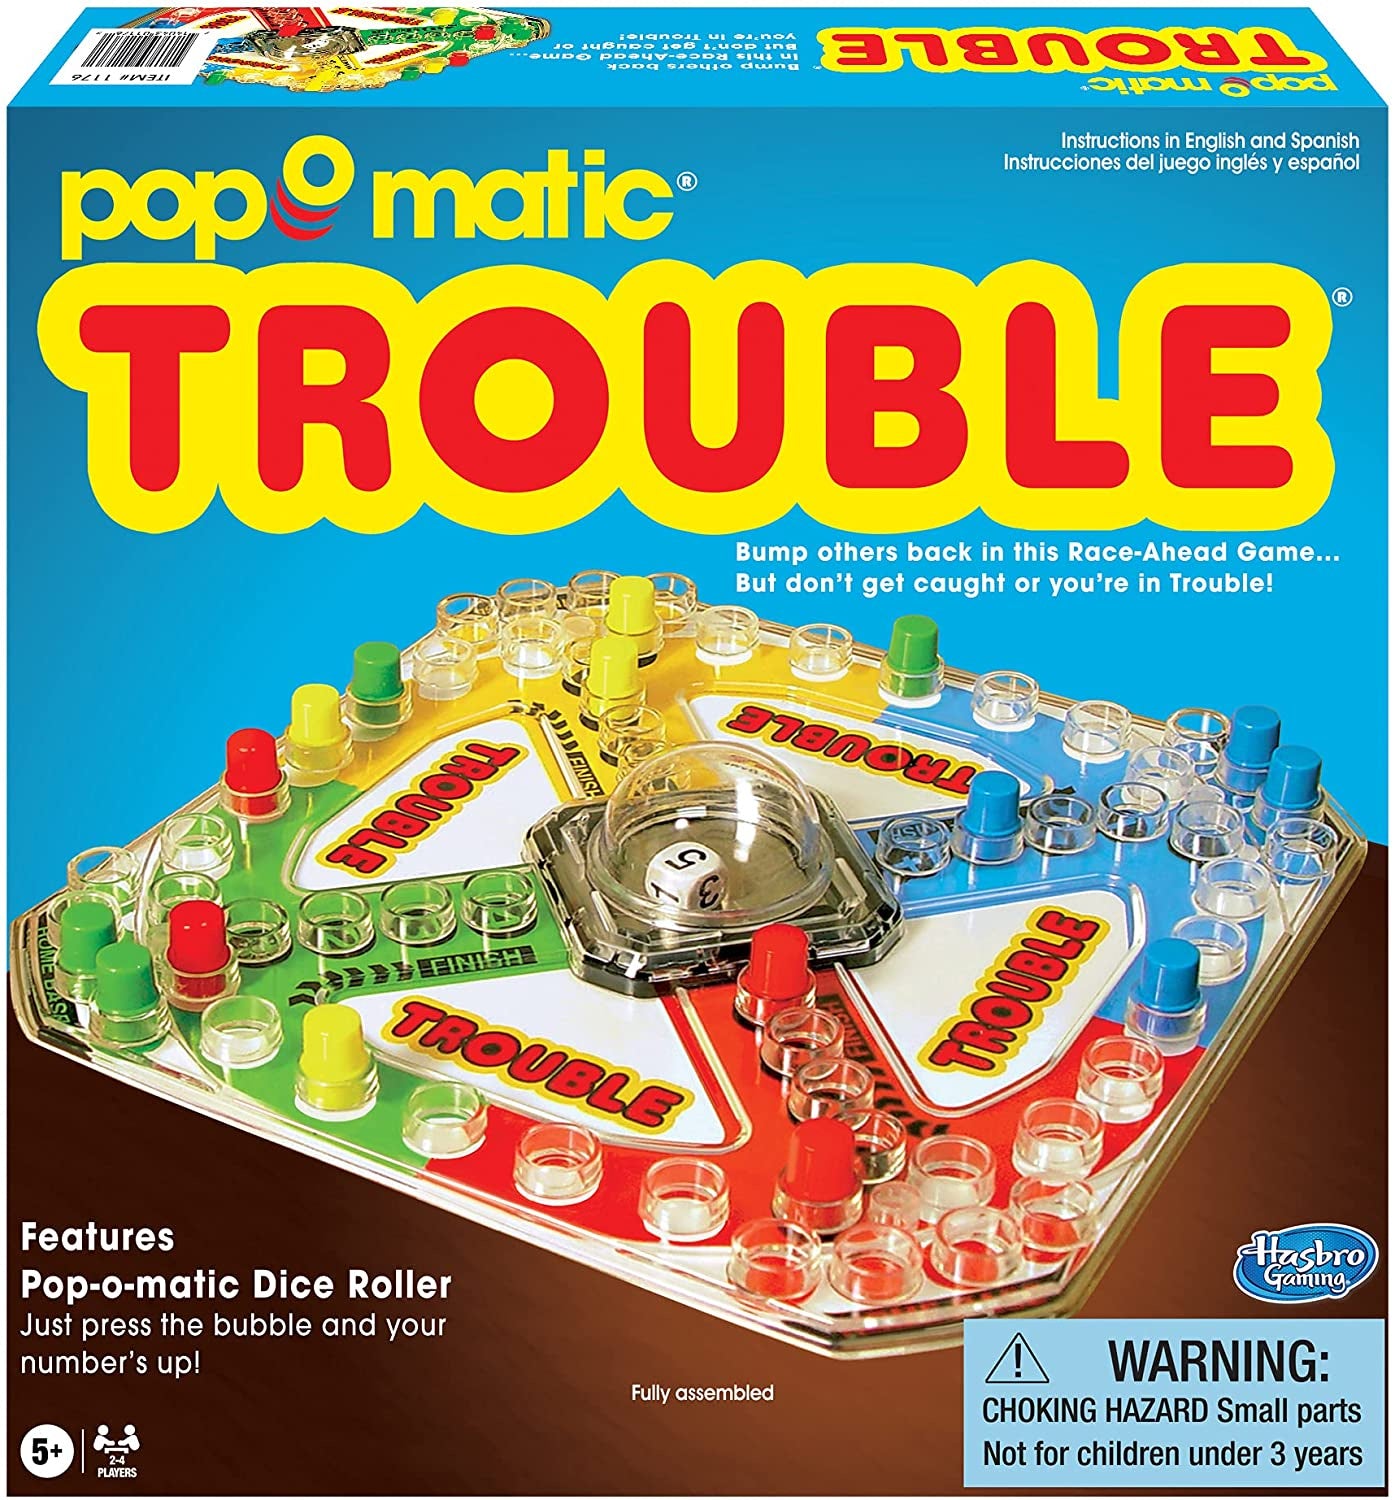 Classic Trouble (Features Pop-o-matic Dice Roller)